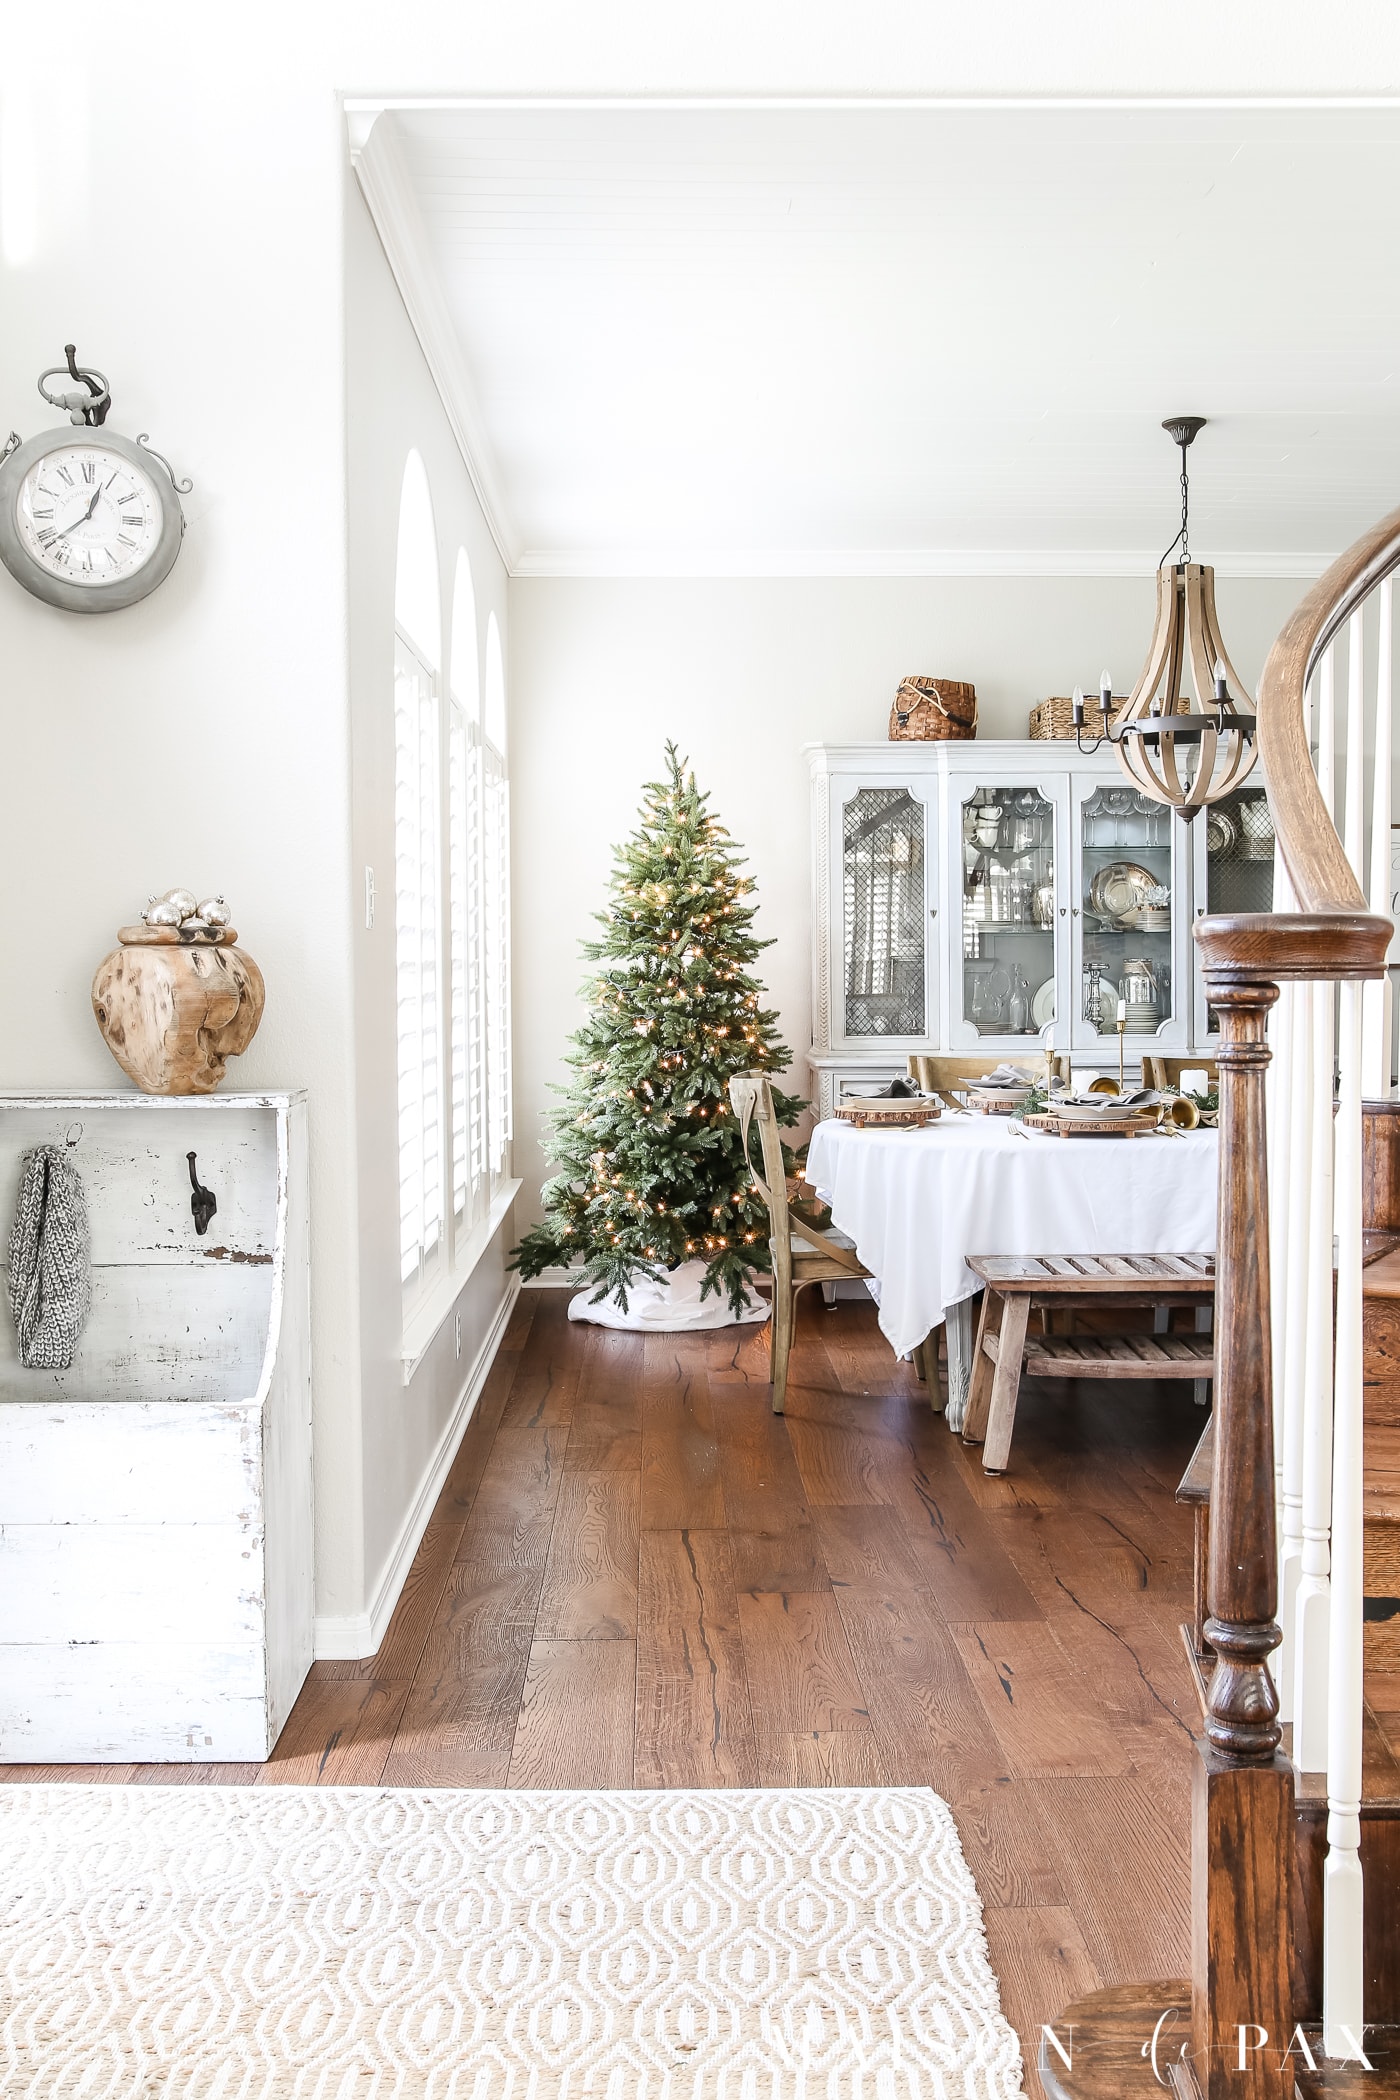 simple naked green tree is perfect for neutral holiday decor #nakedtree